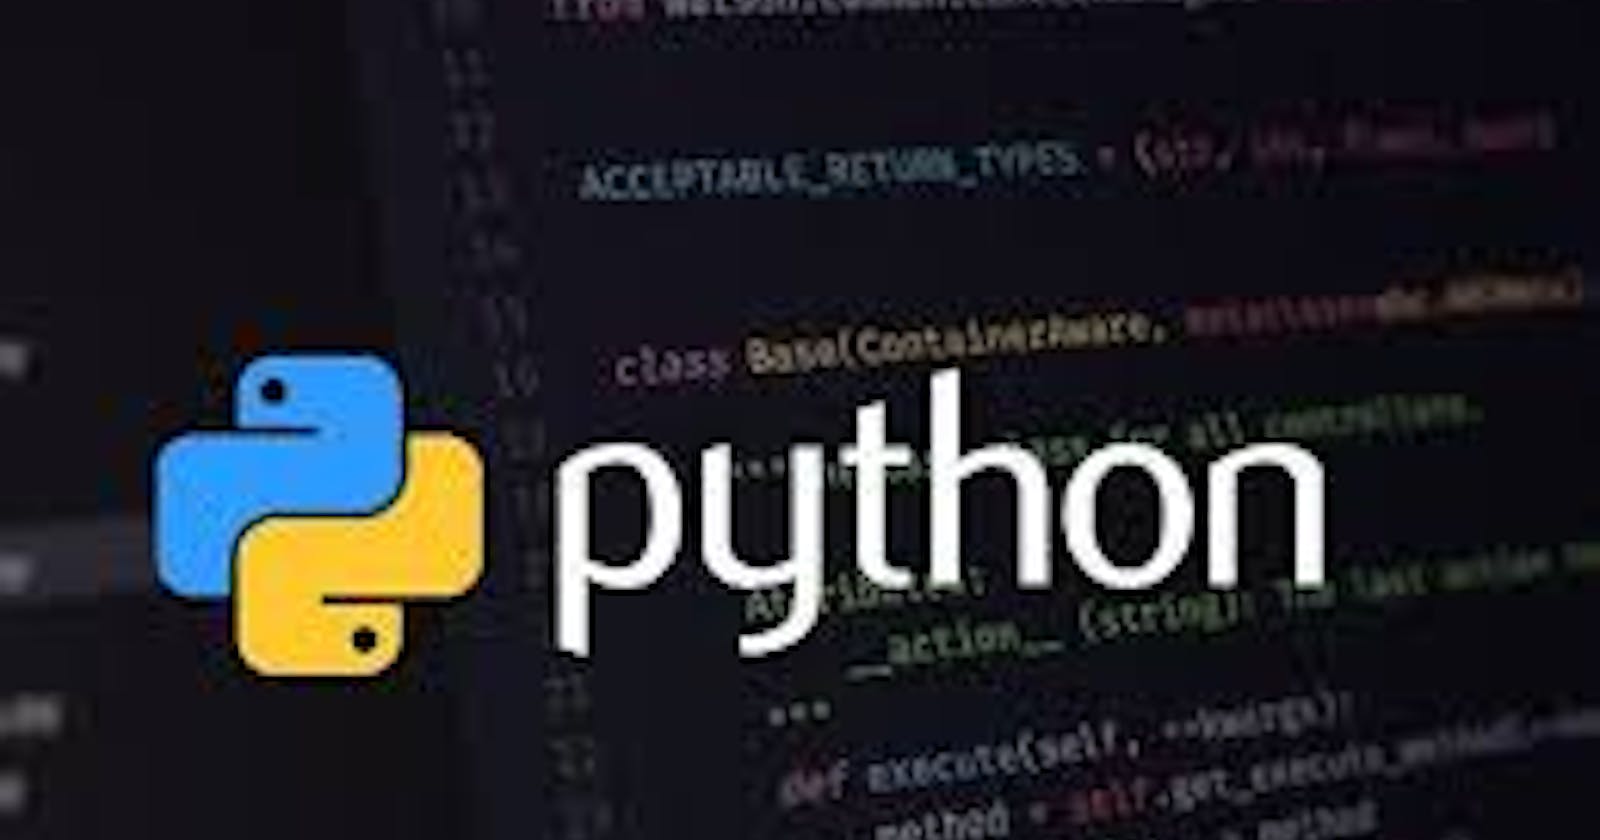 Classes in python